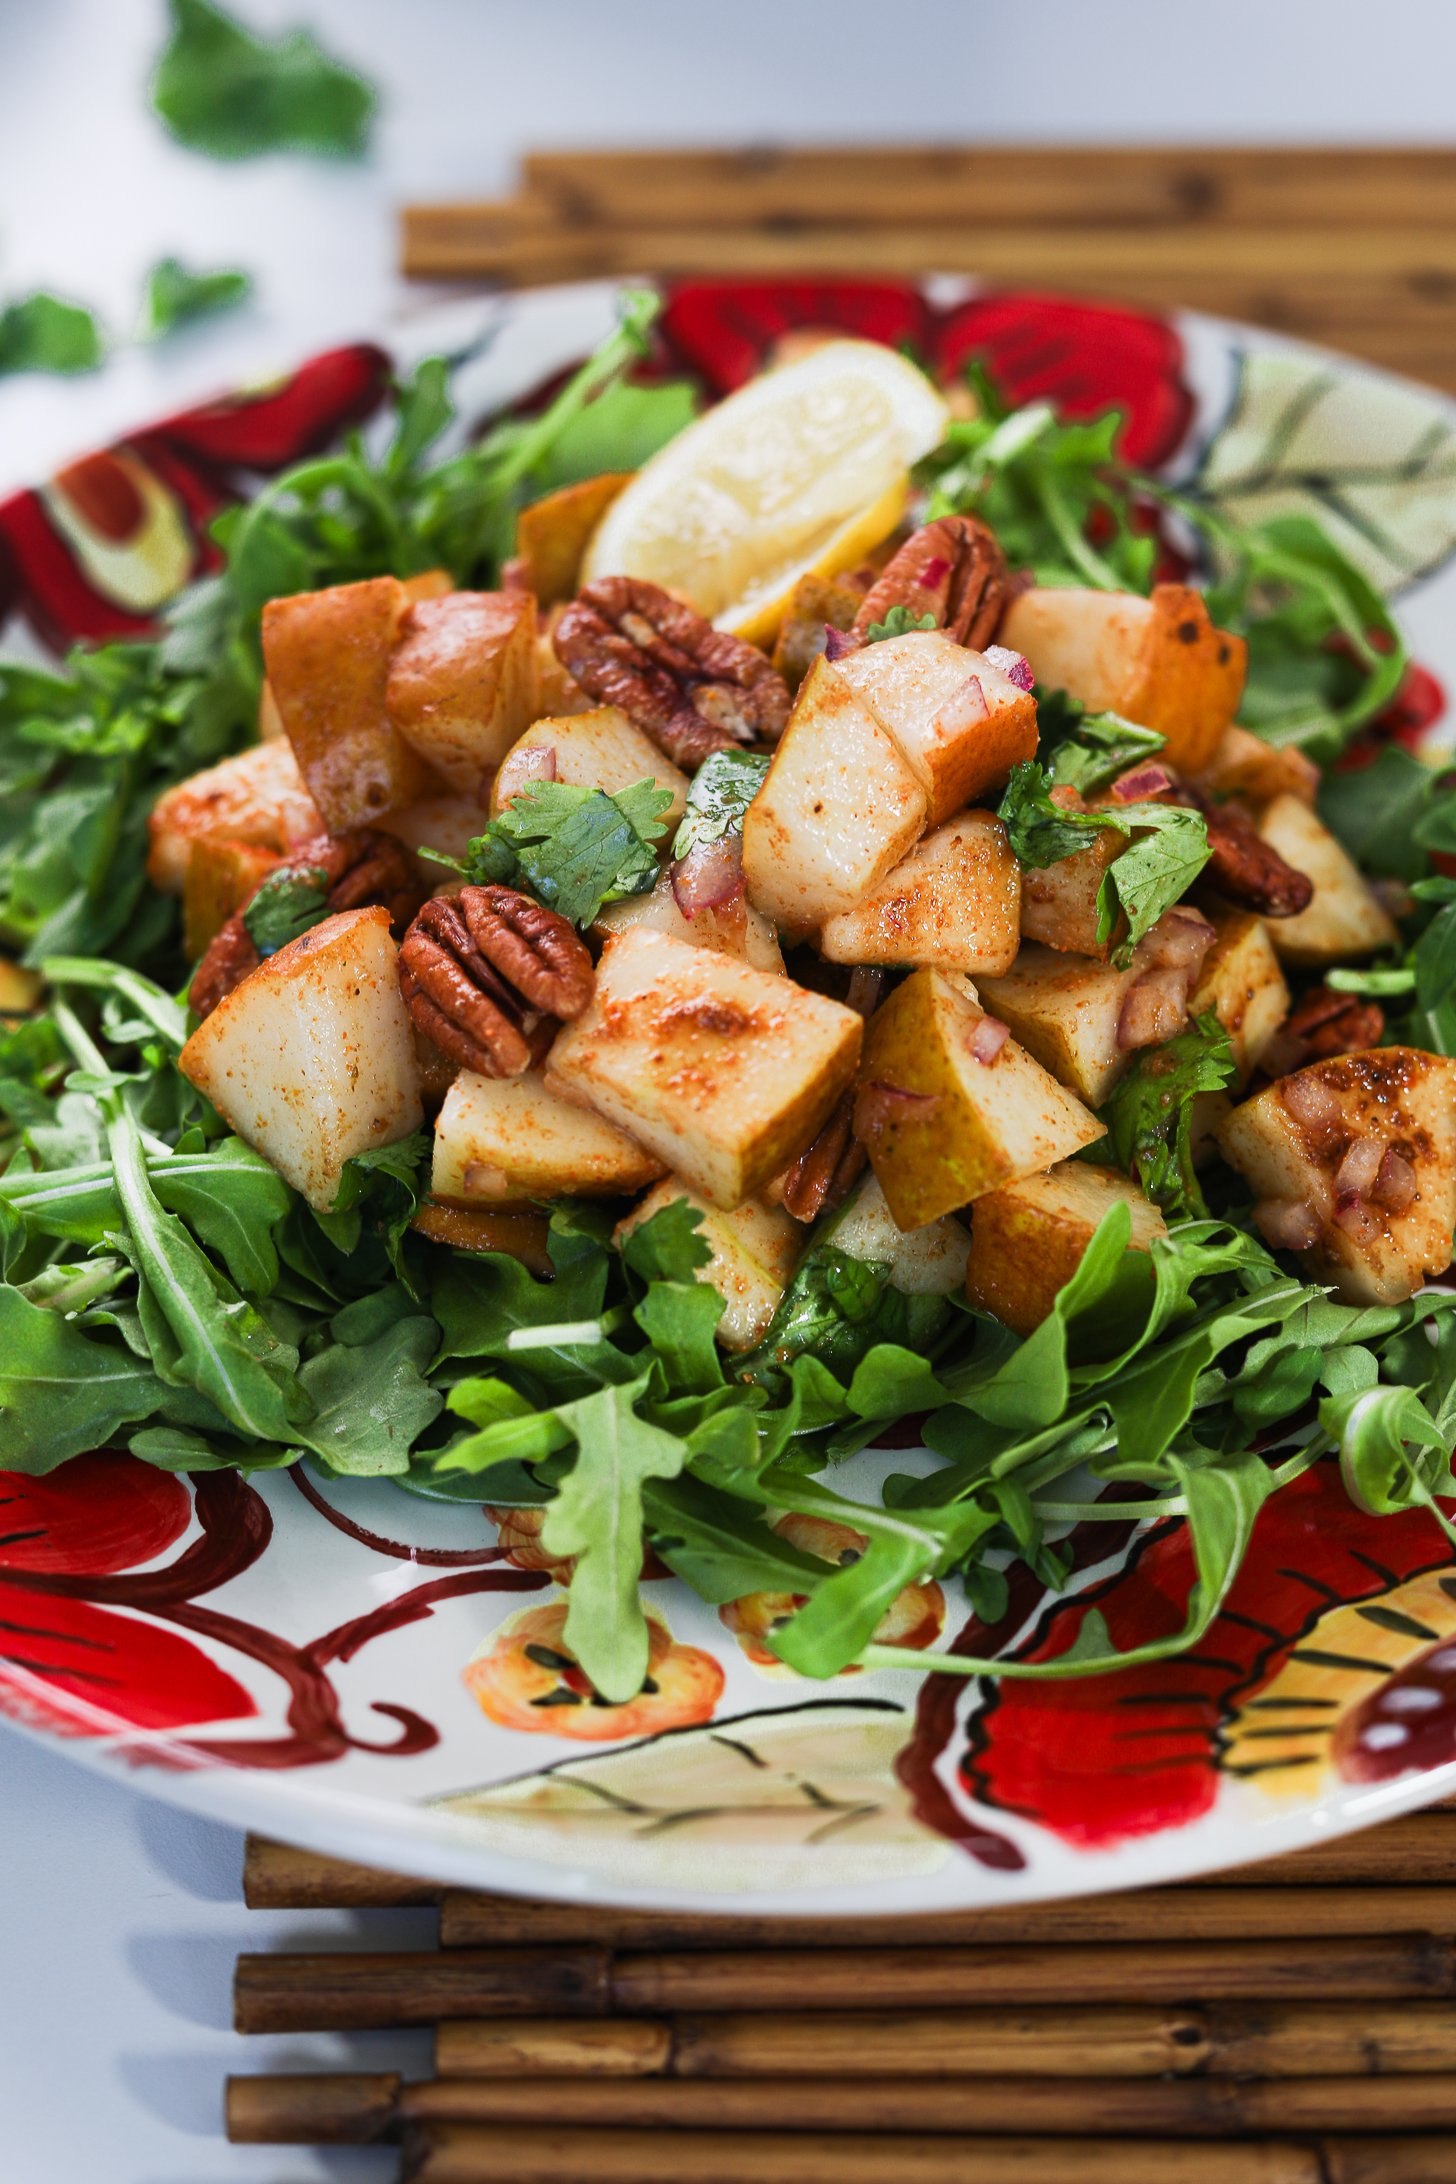 Close up image of Pecan and pear salad arranged atop a bed of rocket (arugula), garnished with cilantro and pecans, served on a floral-printed plate.